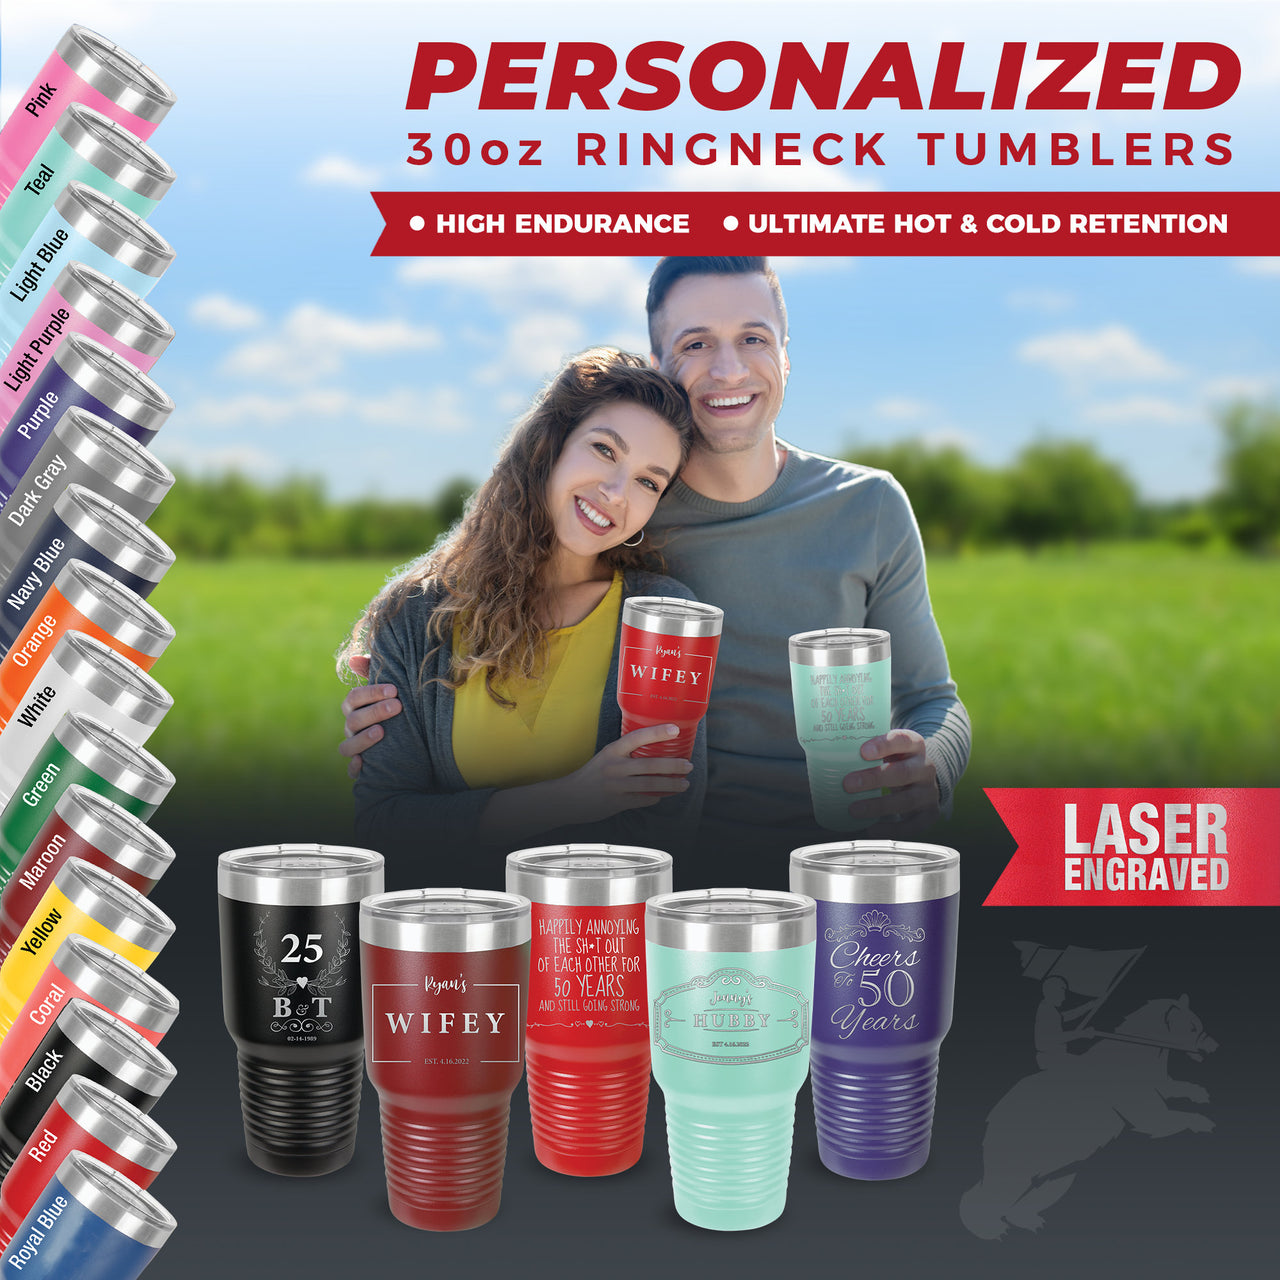 Personalized Tumbler Anniversary Gifts, Anniversary Tumbler Gifts, 50th Anniversary Gift For Him, Wedding Anniversary Tumbler Personalized